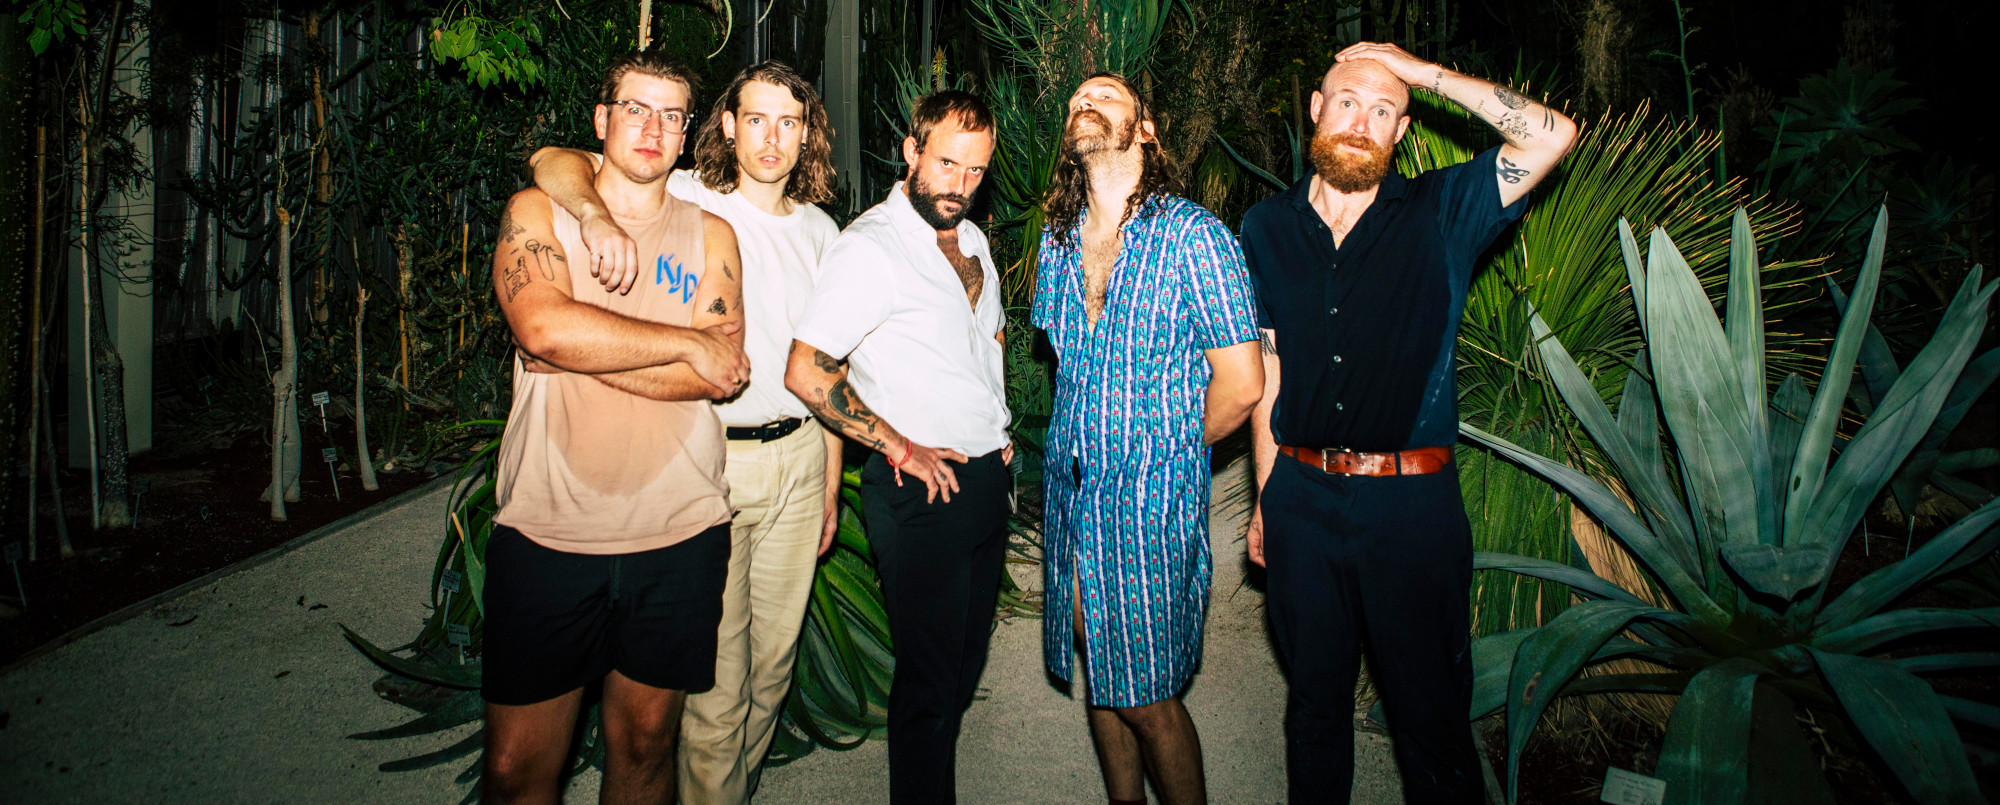 IDLES Drops New Video for “Stockholm Syndrome,” Announce New Tour Dates